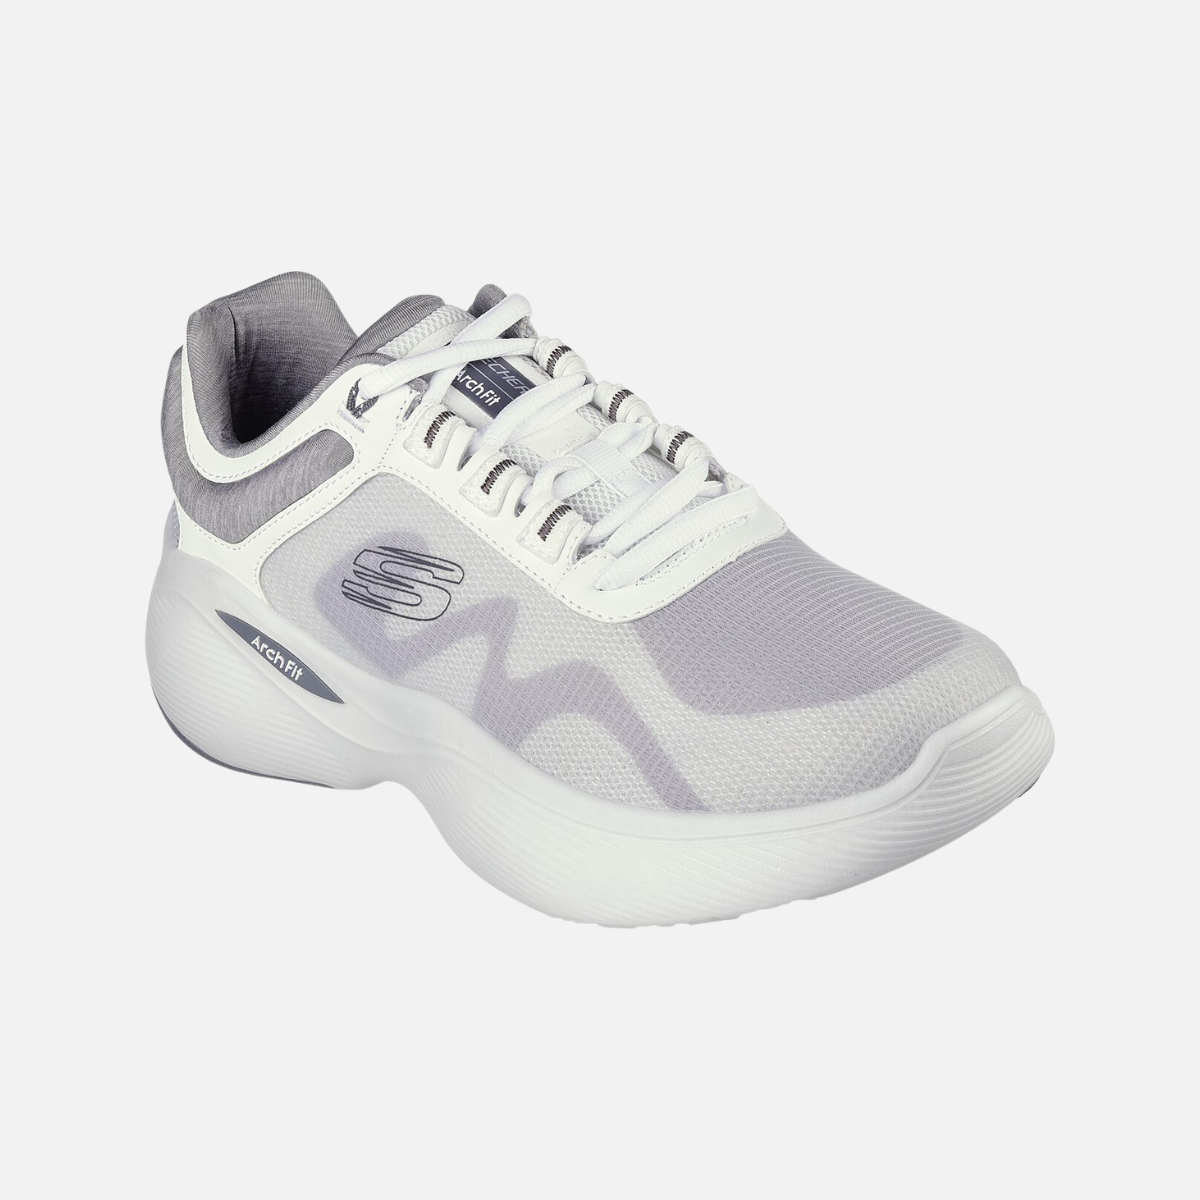 Skechers Arch Fit Infinity Men's Running Shoes -White/Grey